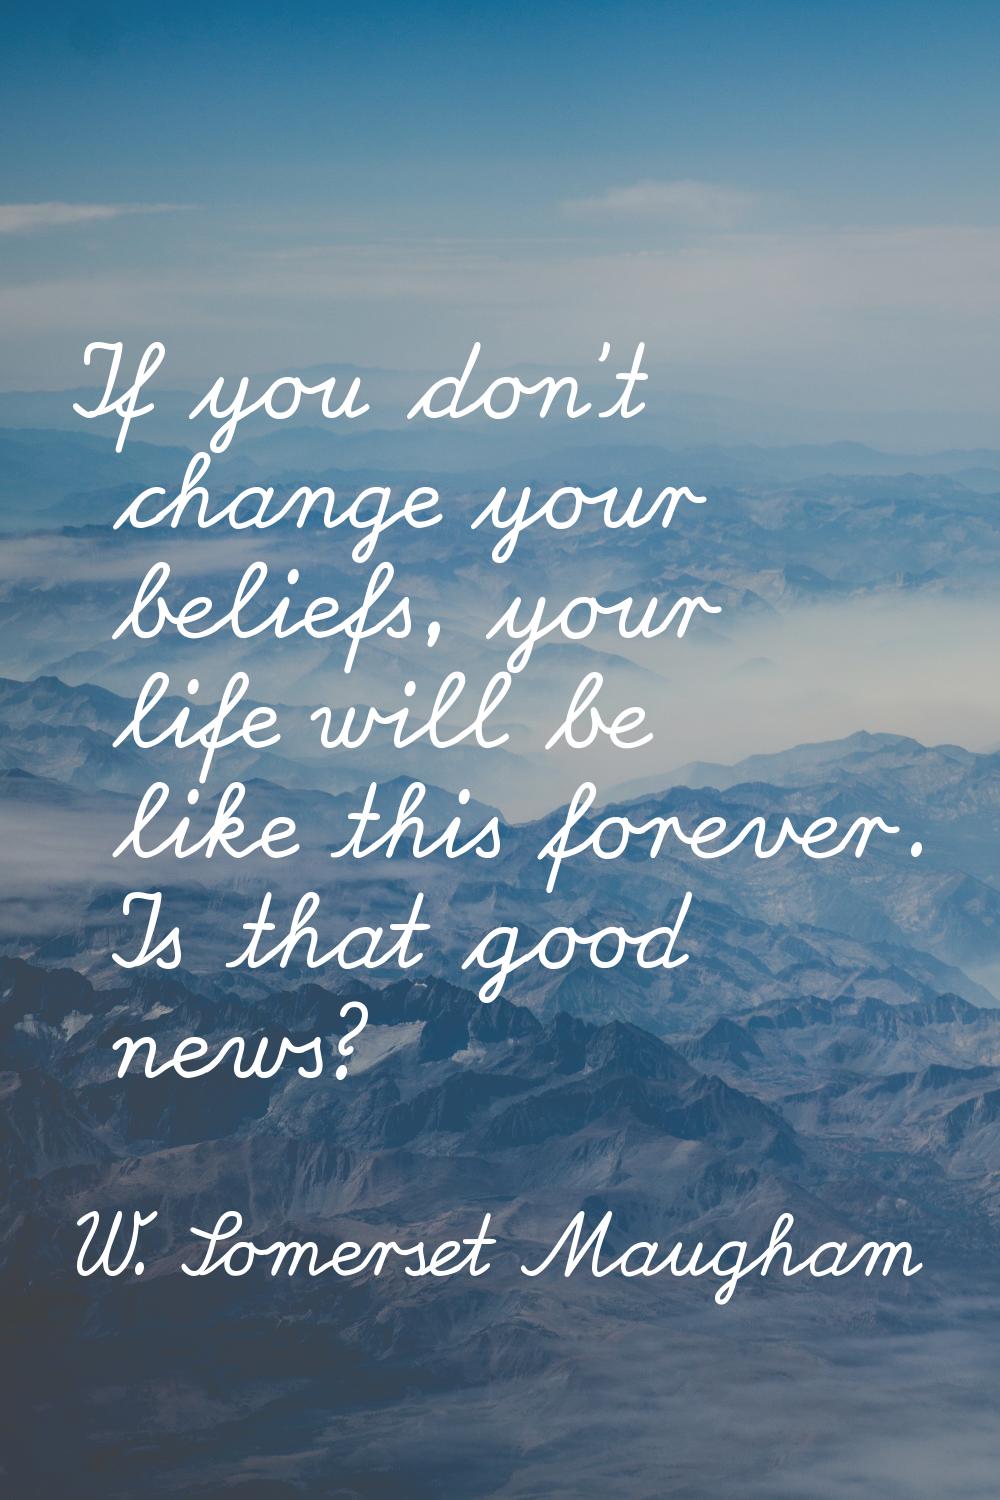 If you don't change your beliefs, your life will be like this forever. Is that good news?